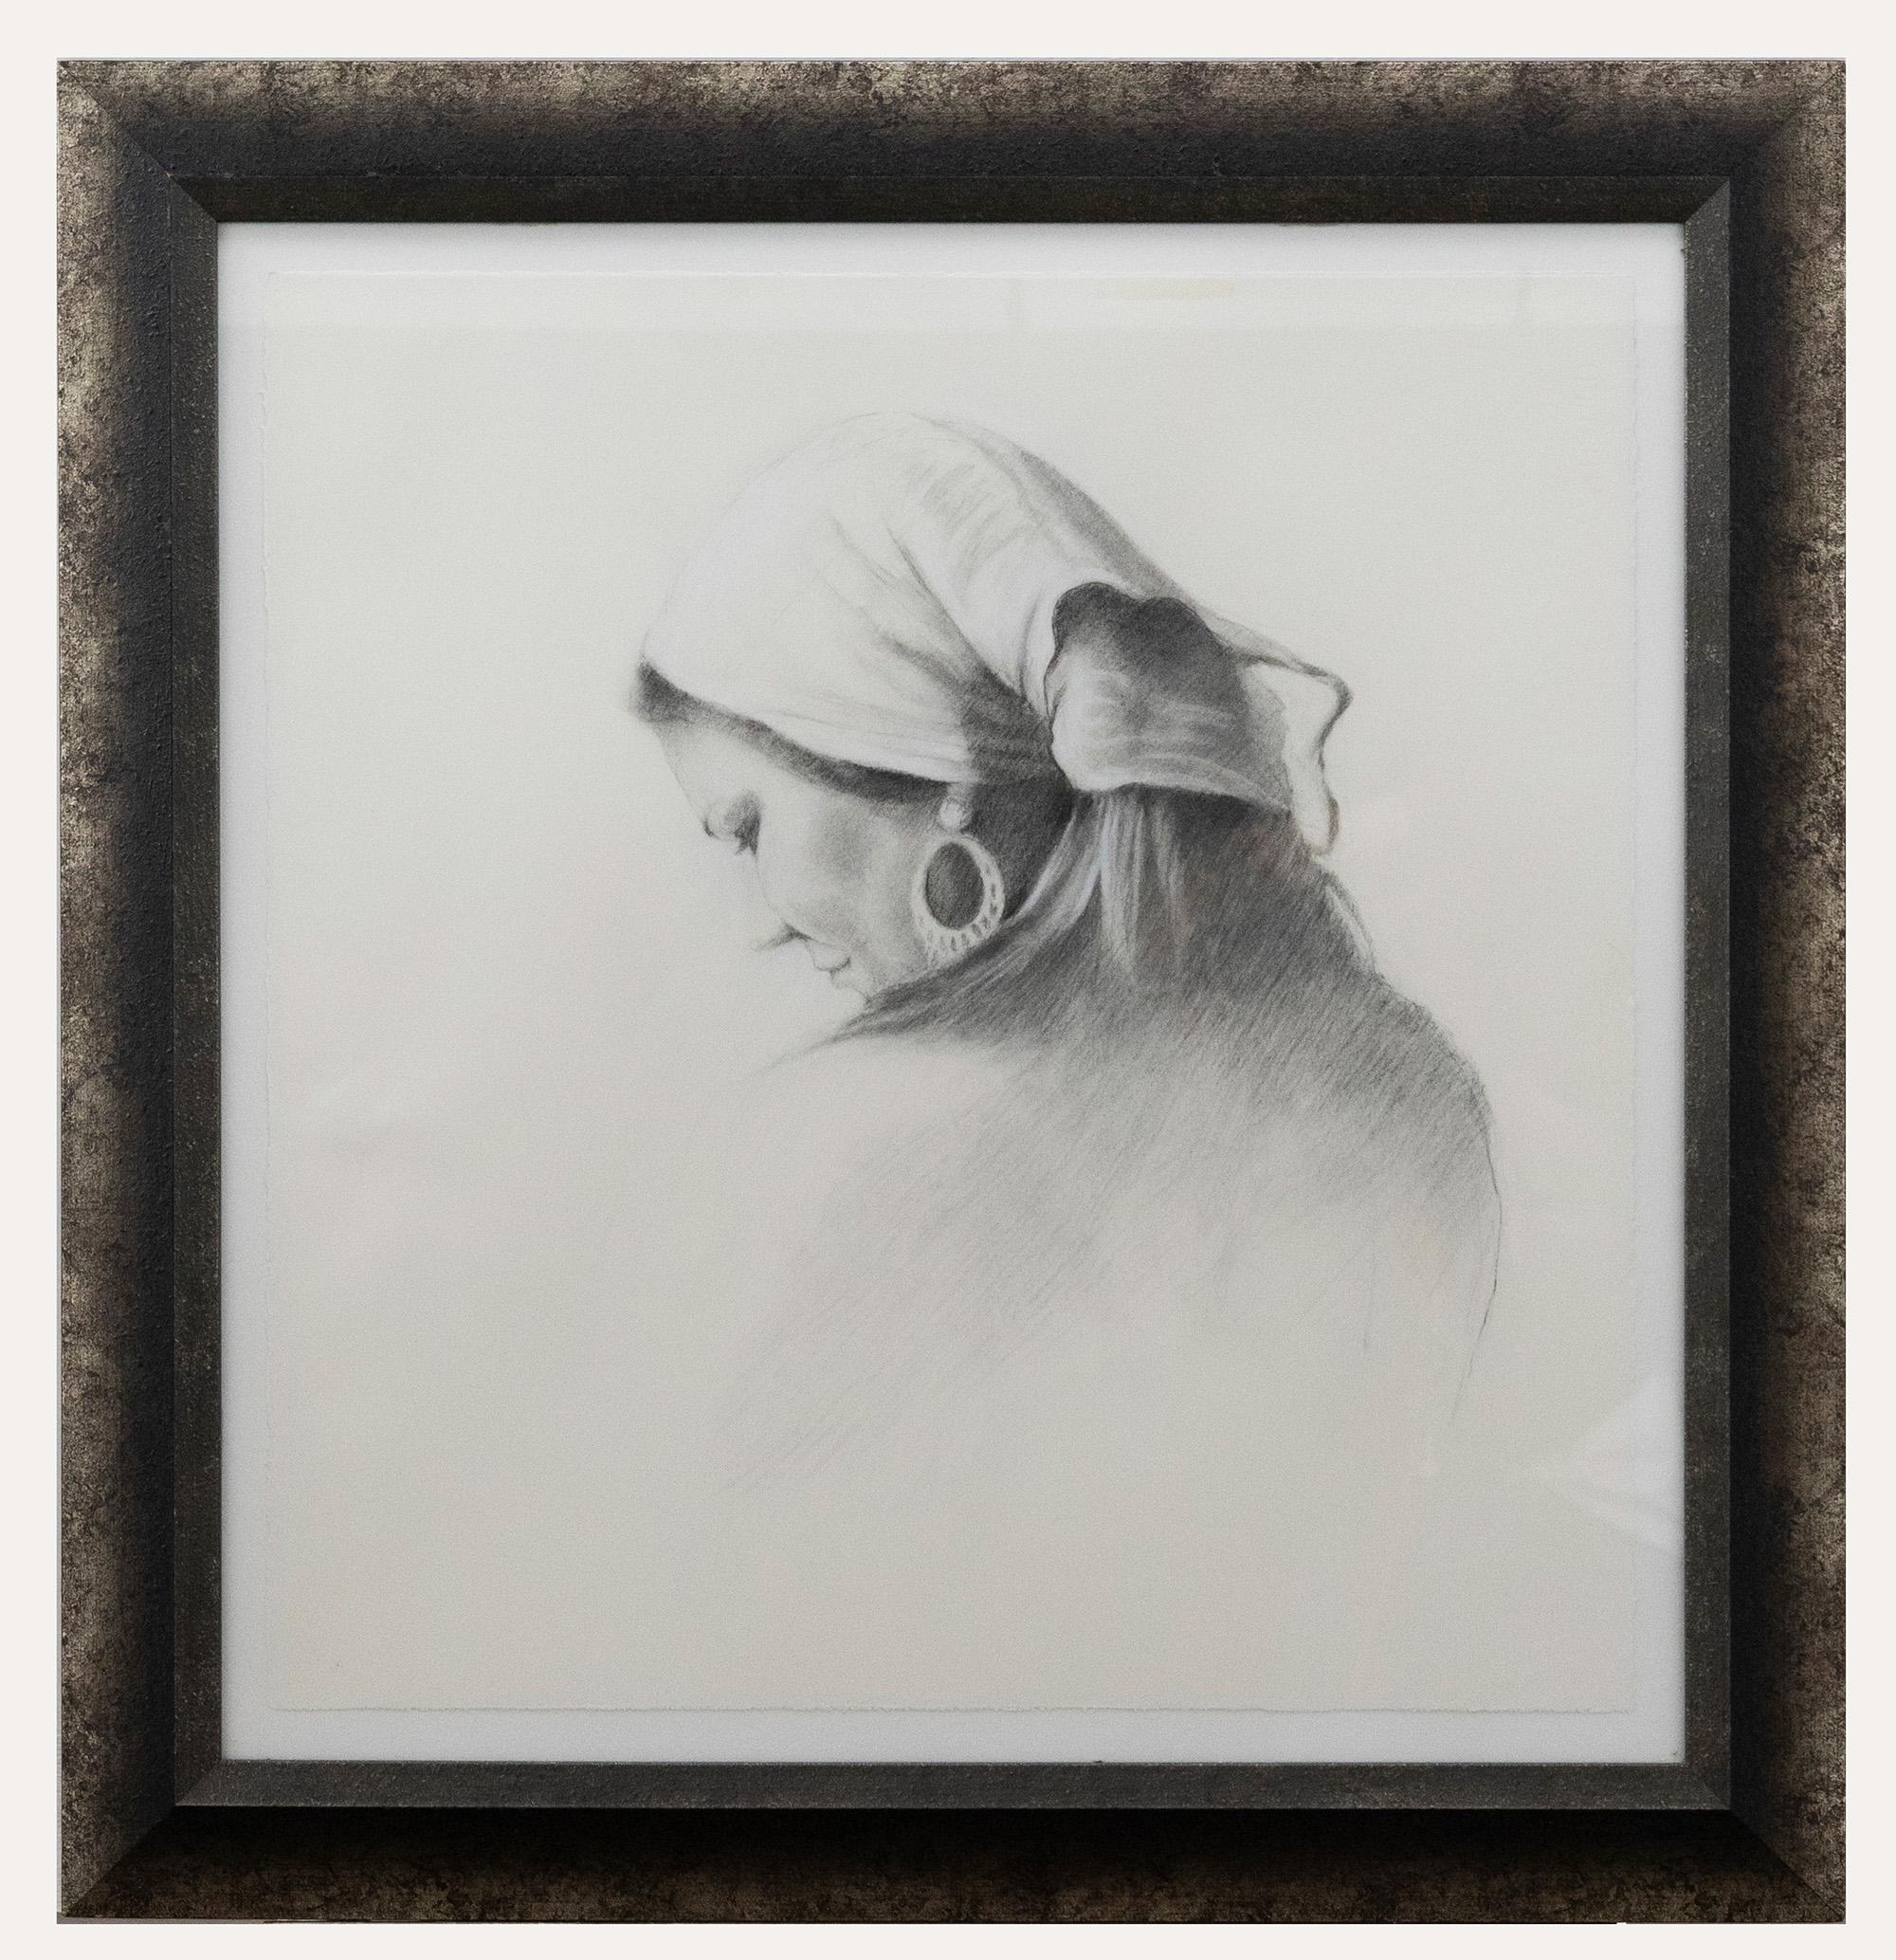 Contemporary Graphite Drawing - Woman in a Headscarf